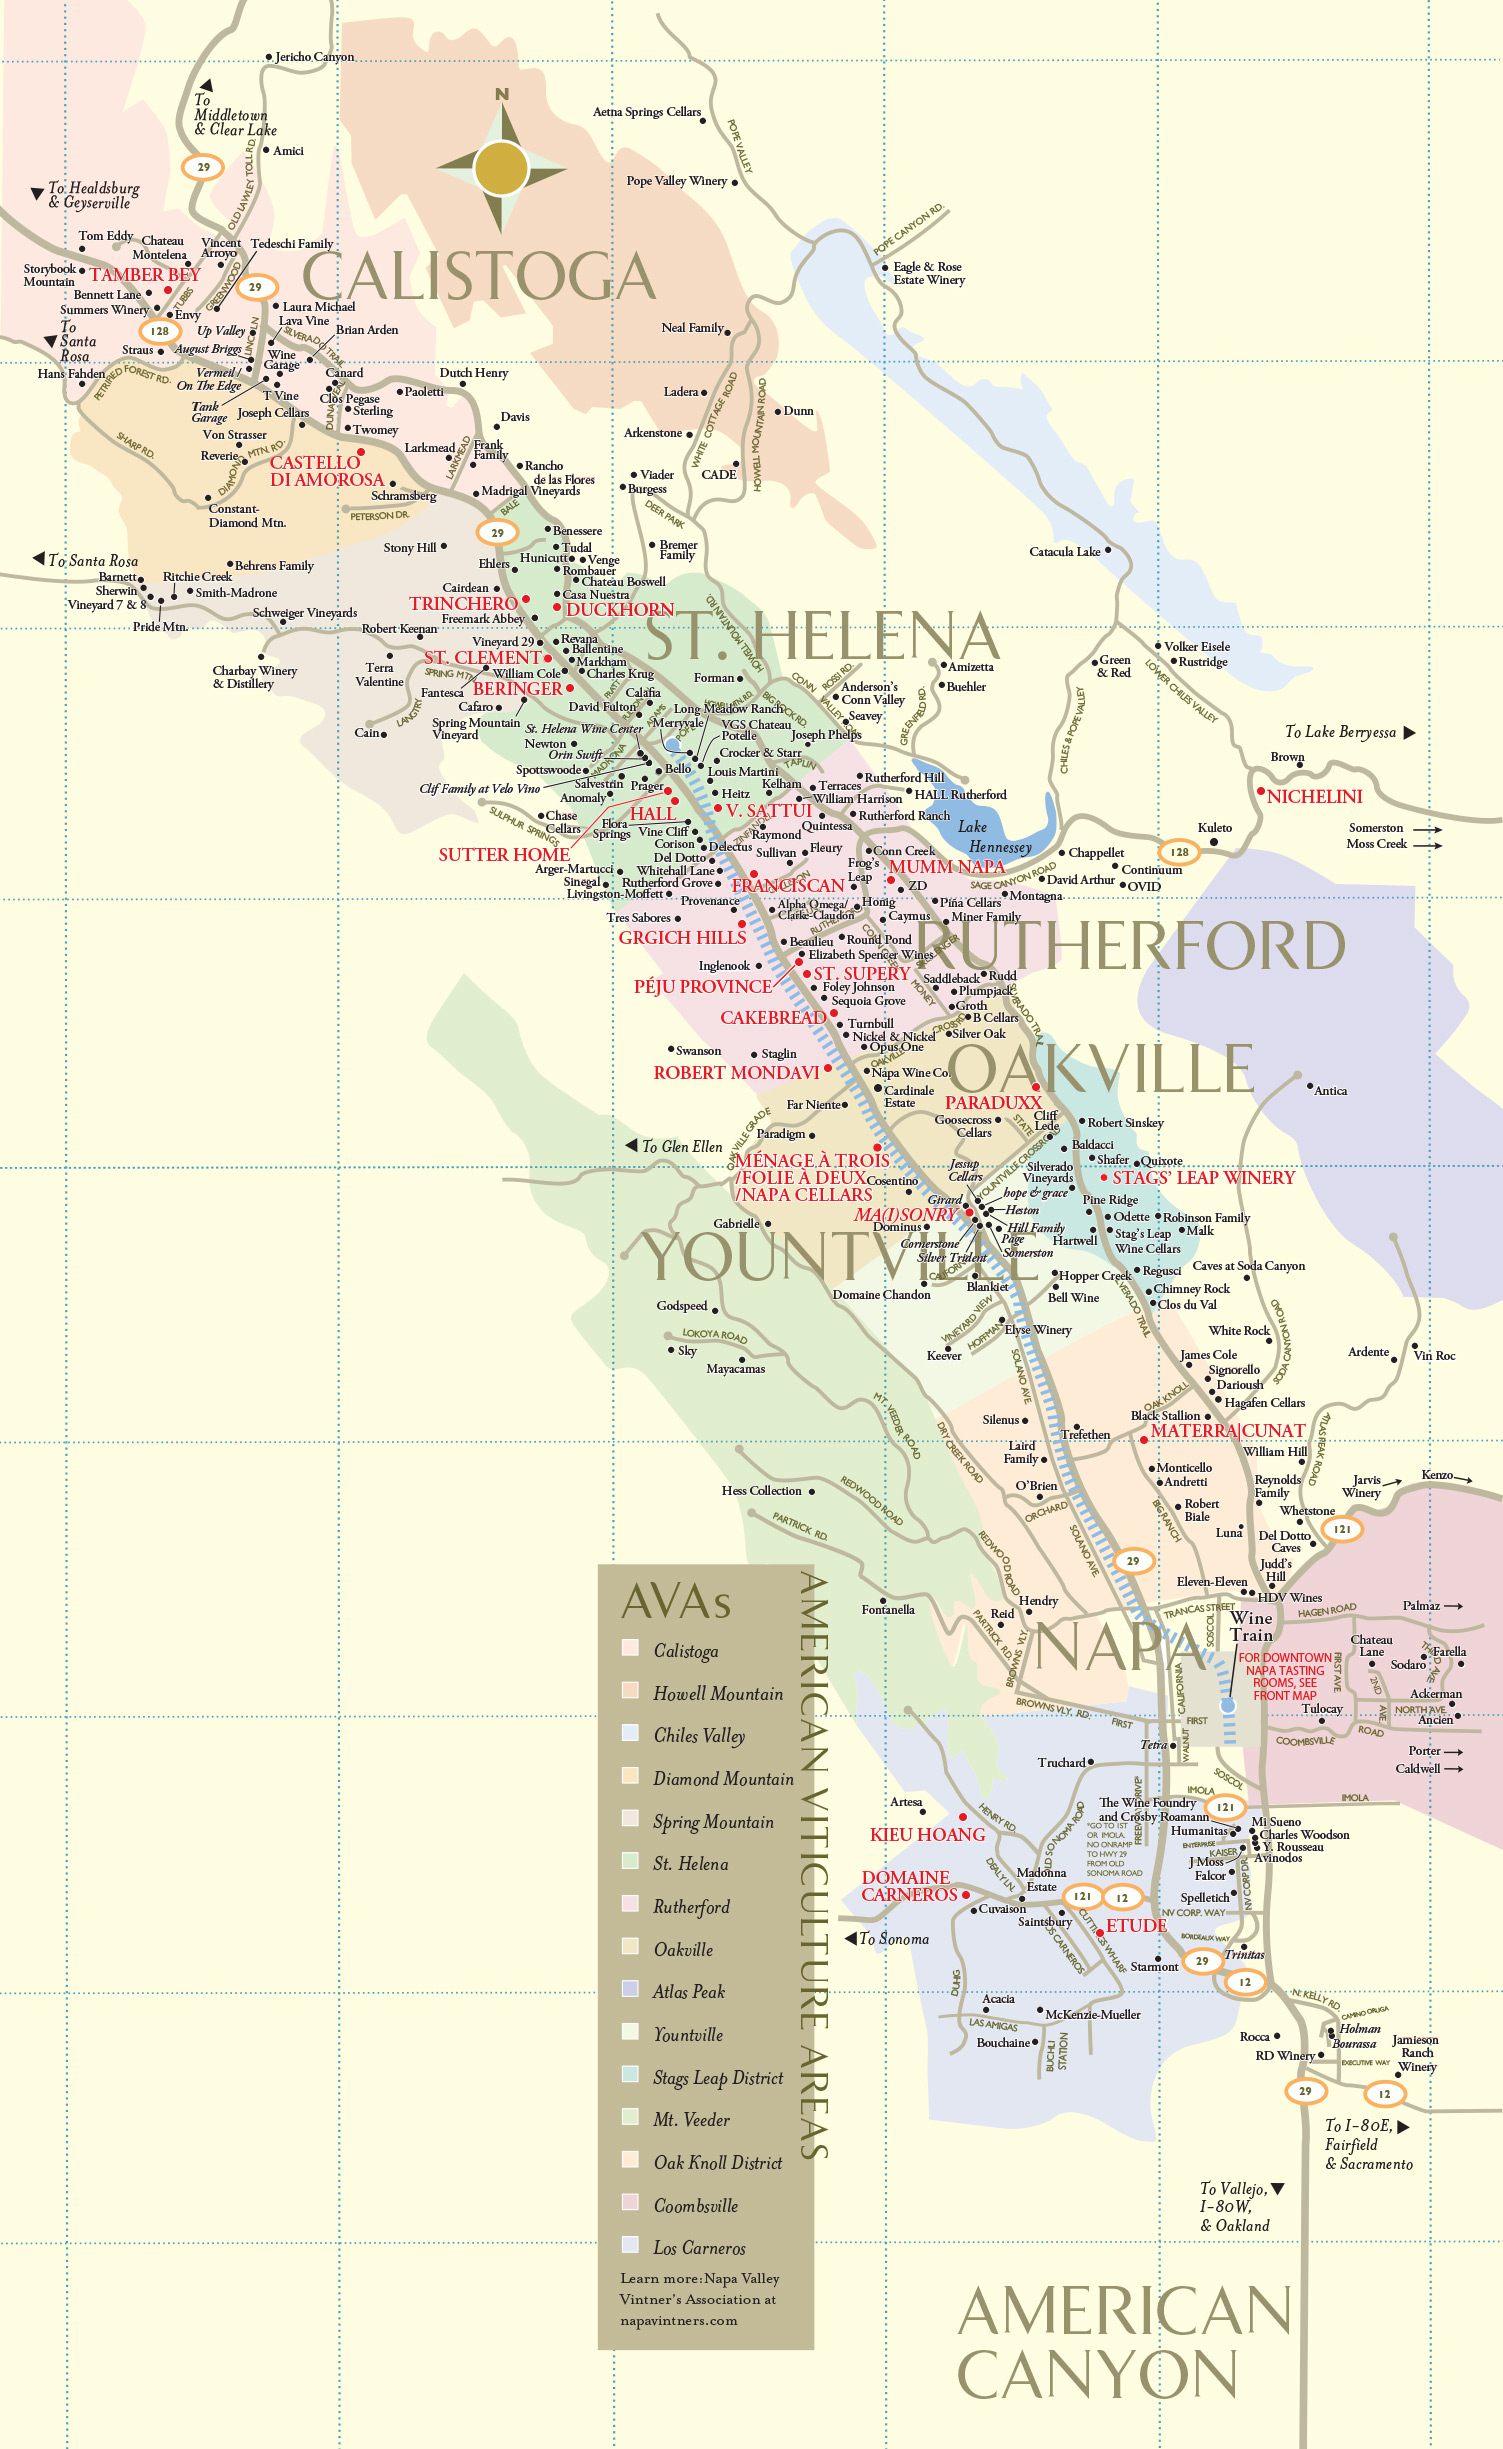 Napa Valley Wineries | Wine Tastings, Tours &amp;amp; Winery Map - California Wine Trail Map